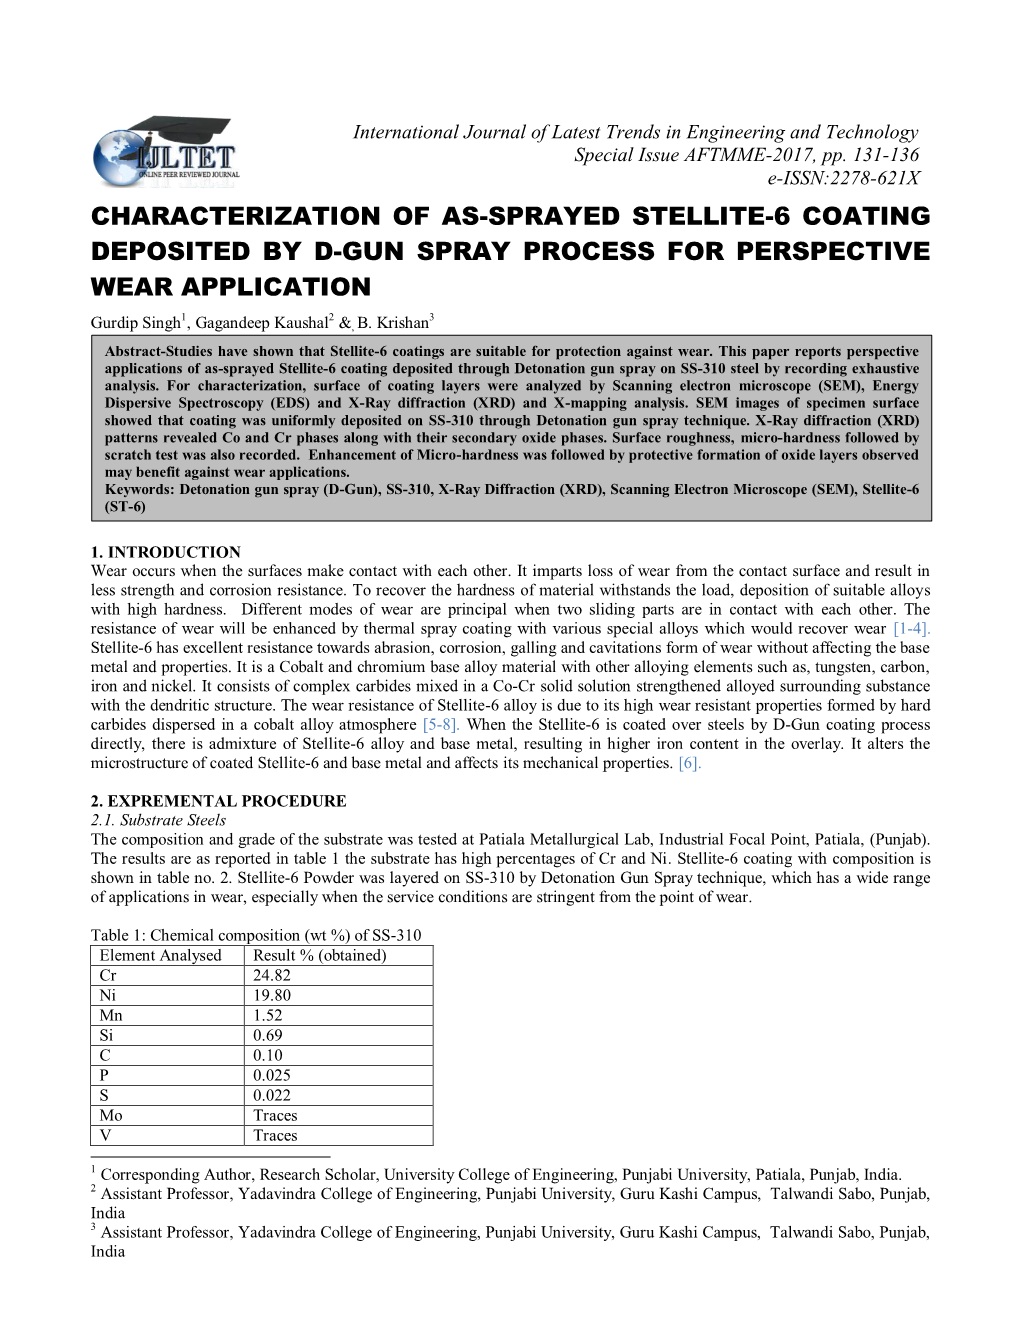 Characterization of As-Sprayed Stellite-6 Coating Deposited by D-Gun Spray Process for Perspective Wear Application